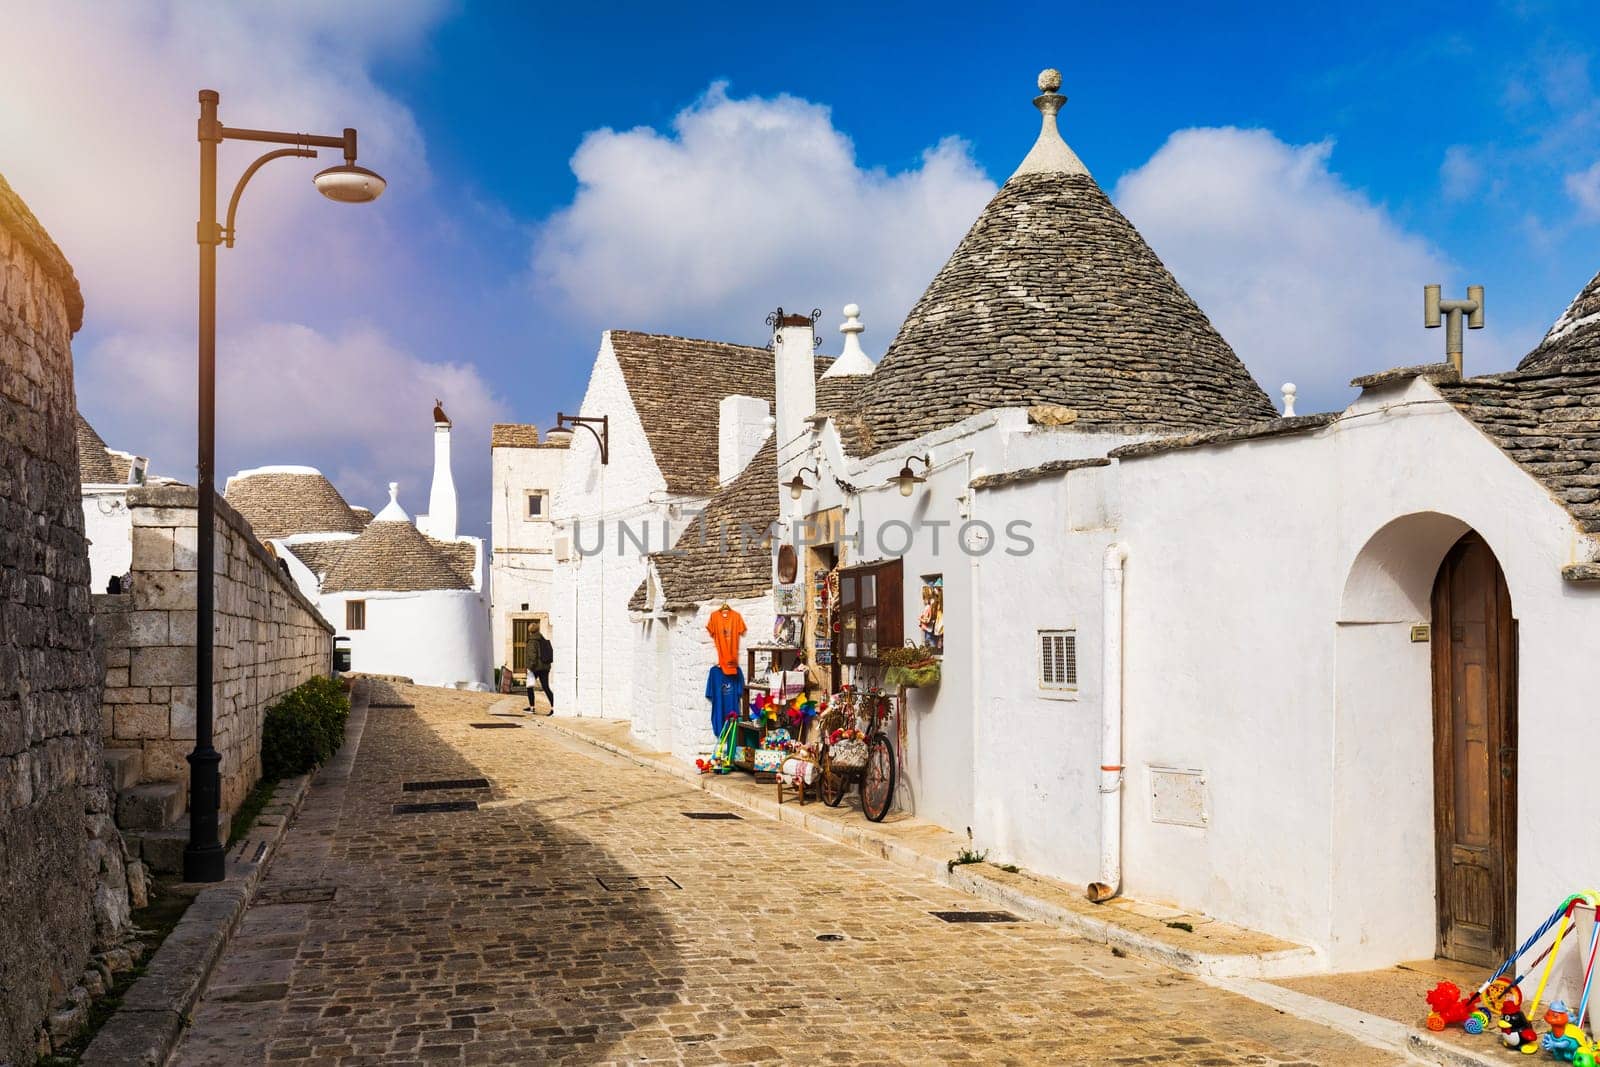 The traditional Trulli houses in Alberobello city, Apulia, Italy. Cityscape over the traditional roofs of the Trulli, original and old houses of this region, Apulia, Alberobello, Puglia, Italy.  by DaLiu